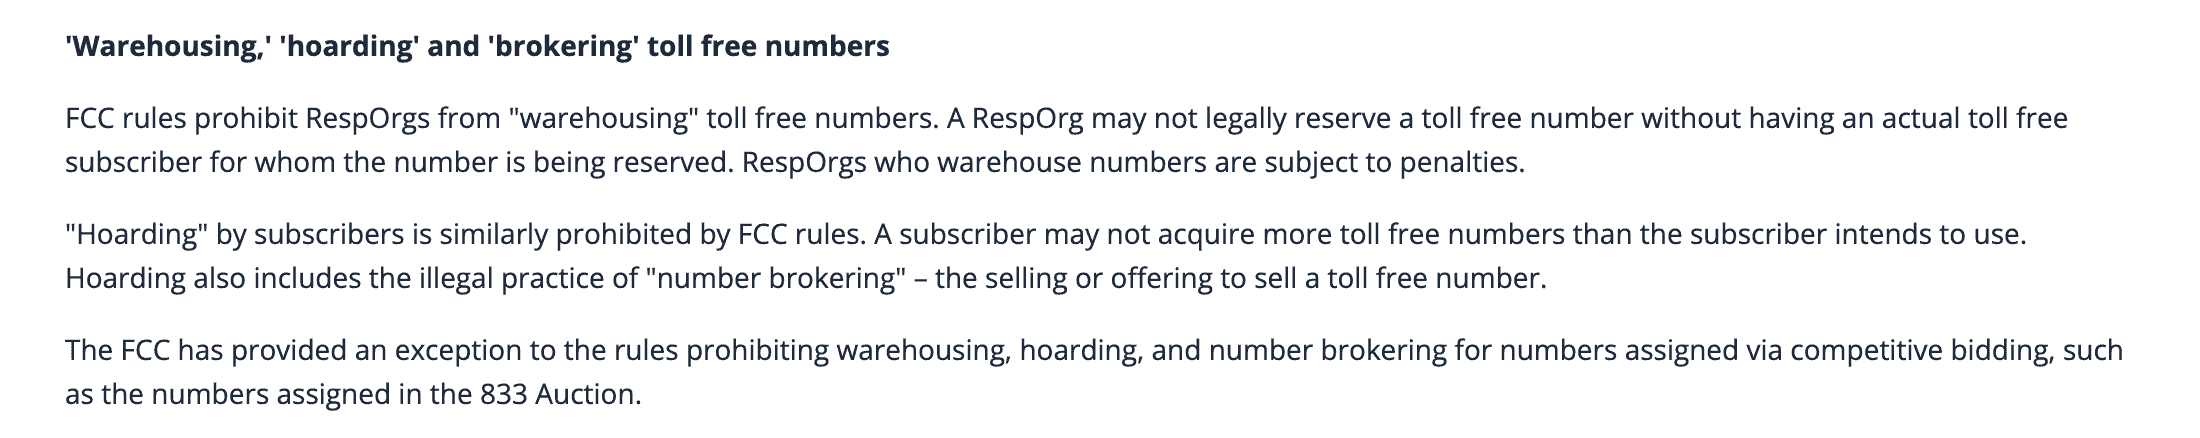 Warehousing toll free number facts